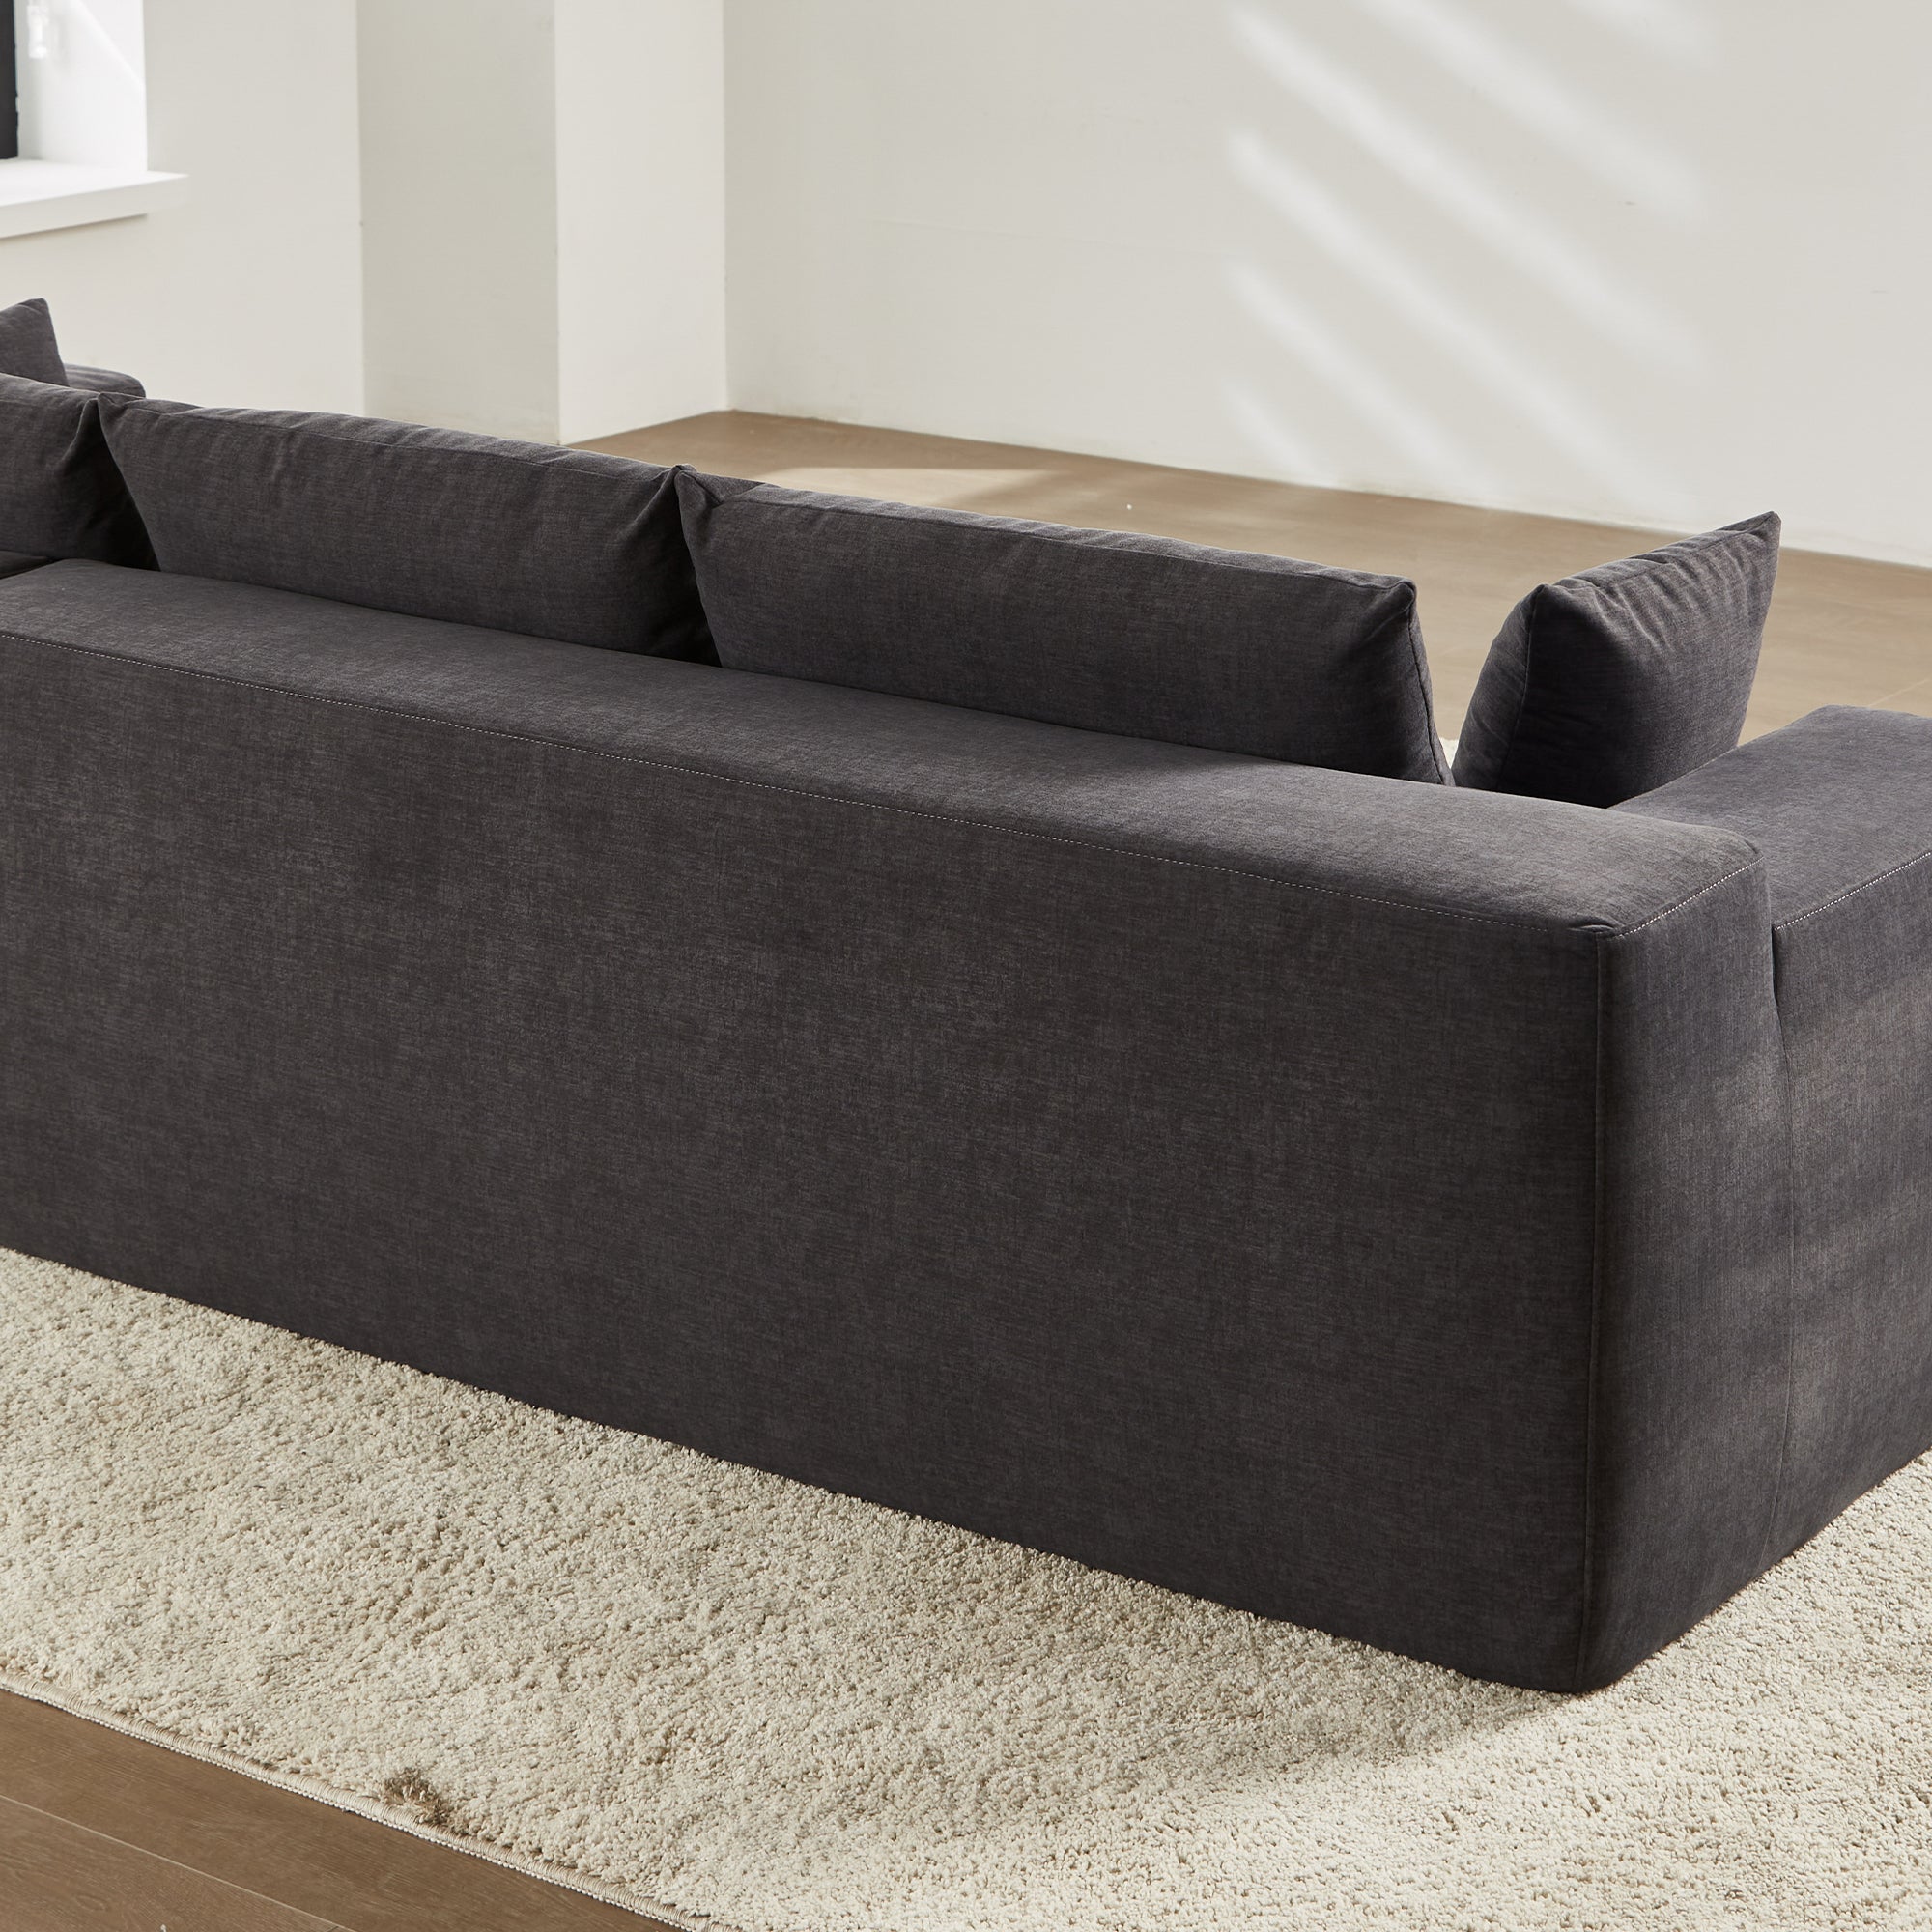 Ovios 104" L-Shape Modular Couch with Chaise, Chenille Fabric, No Assembly Required